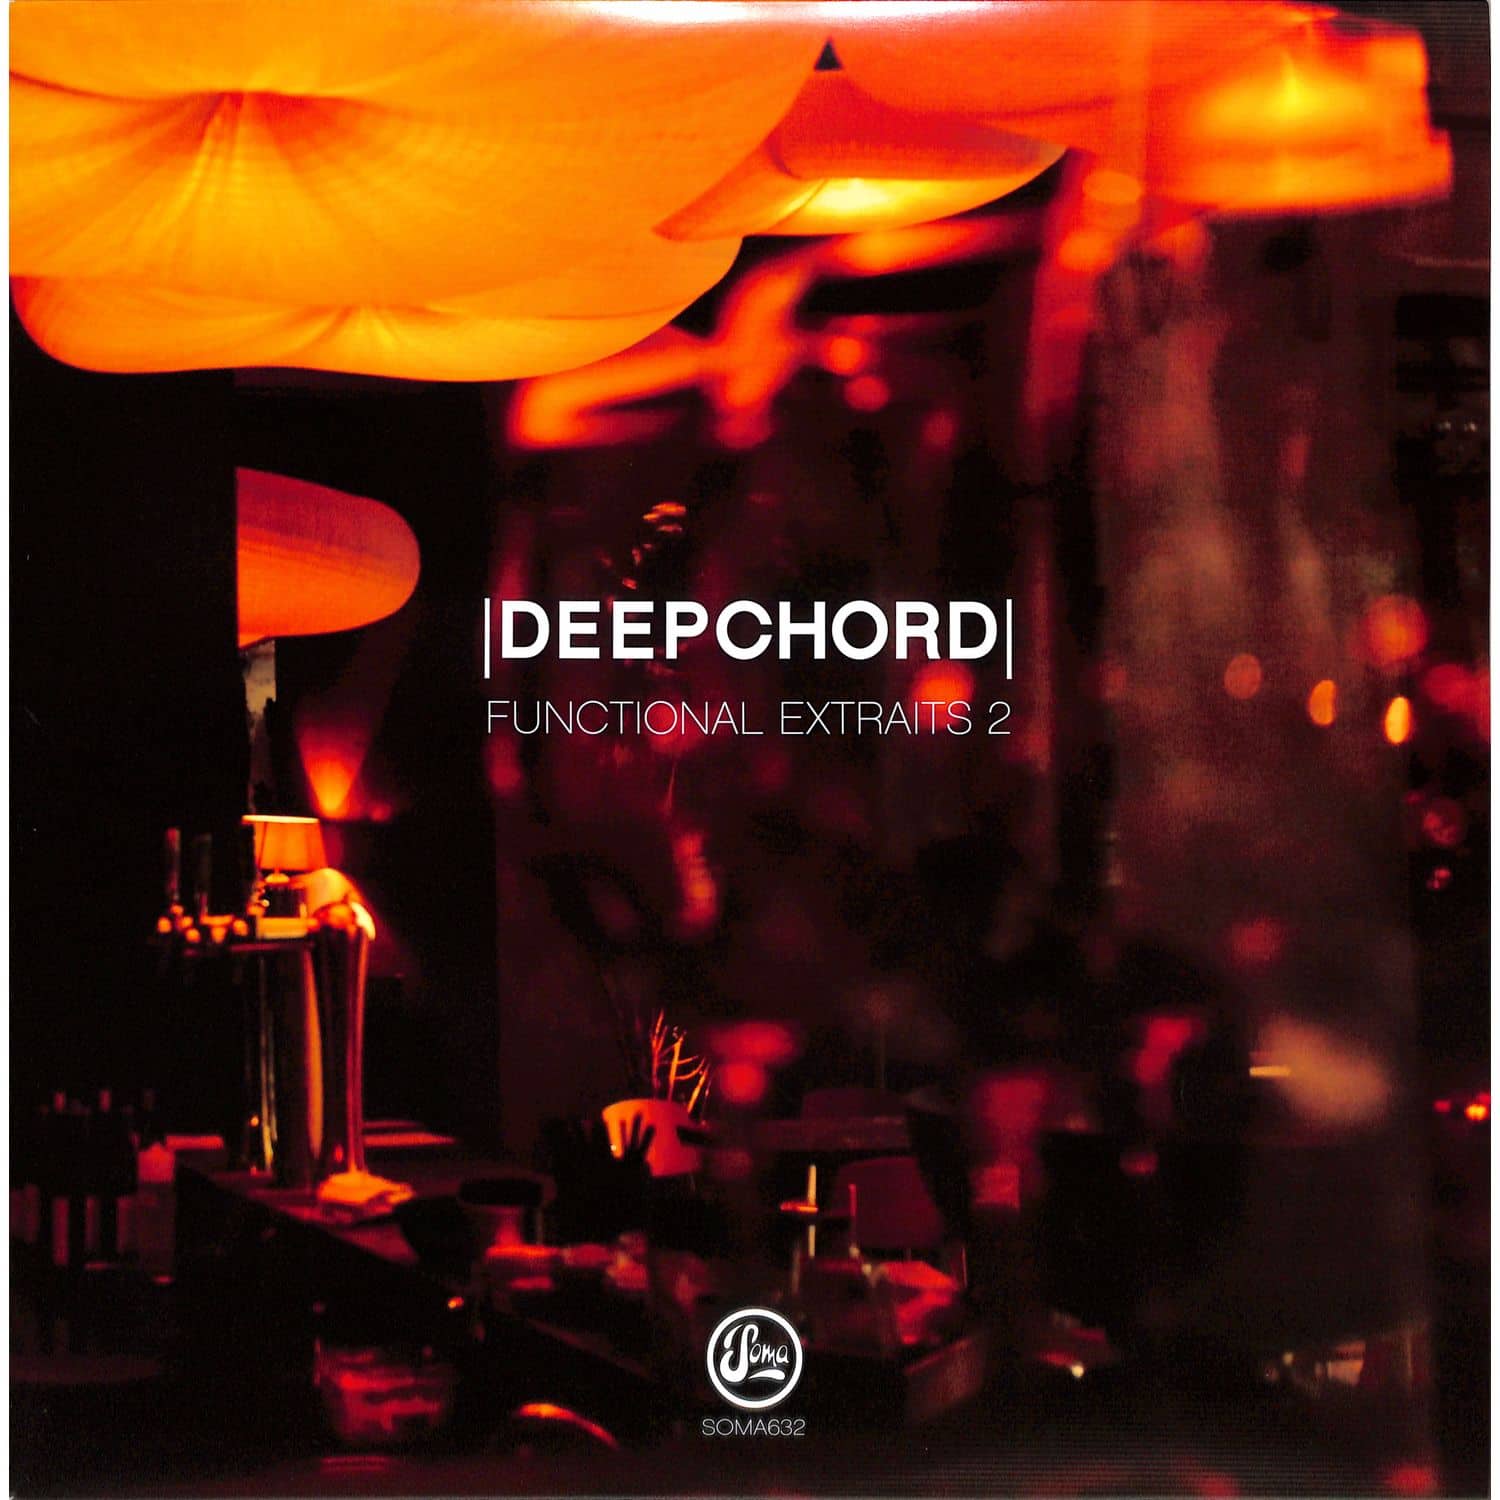 Deepchord - FUNCTIONAL EXTRAITS 2